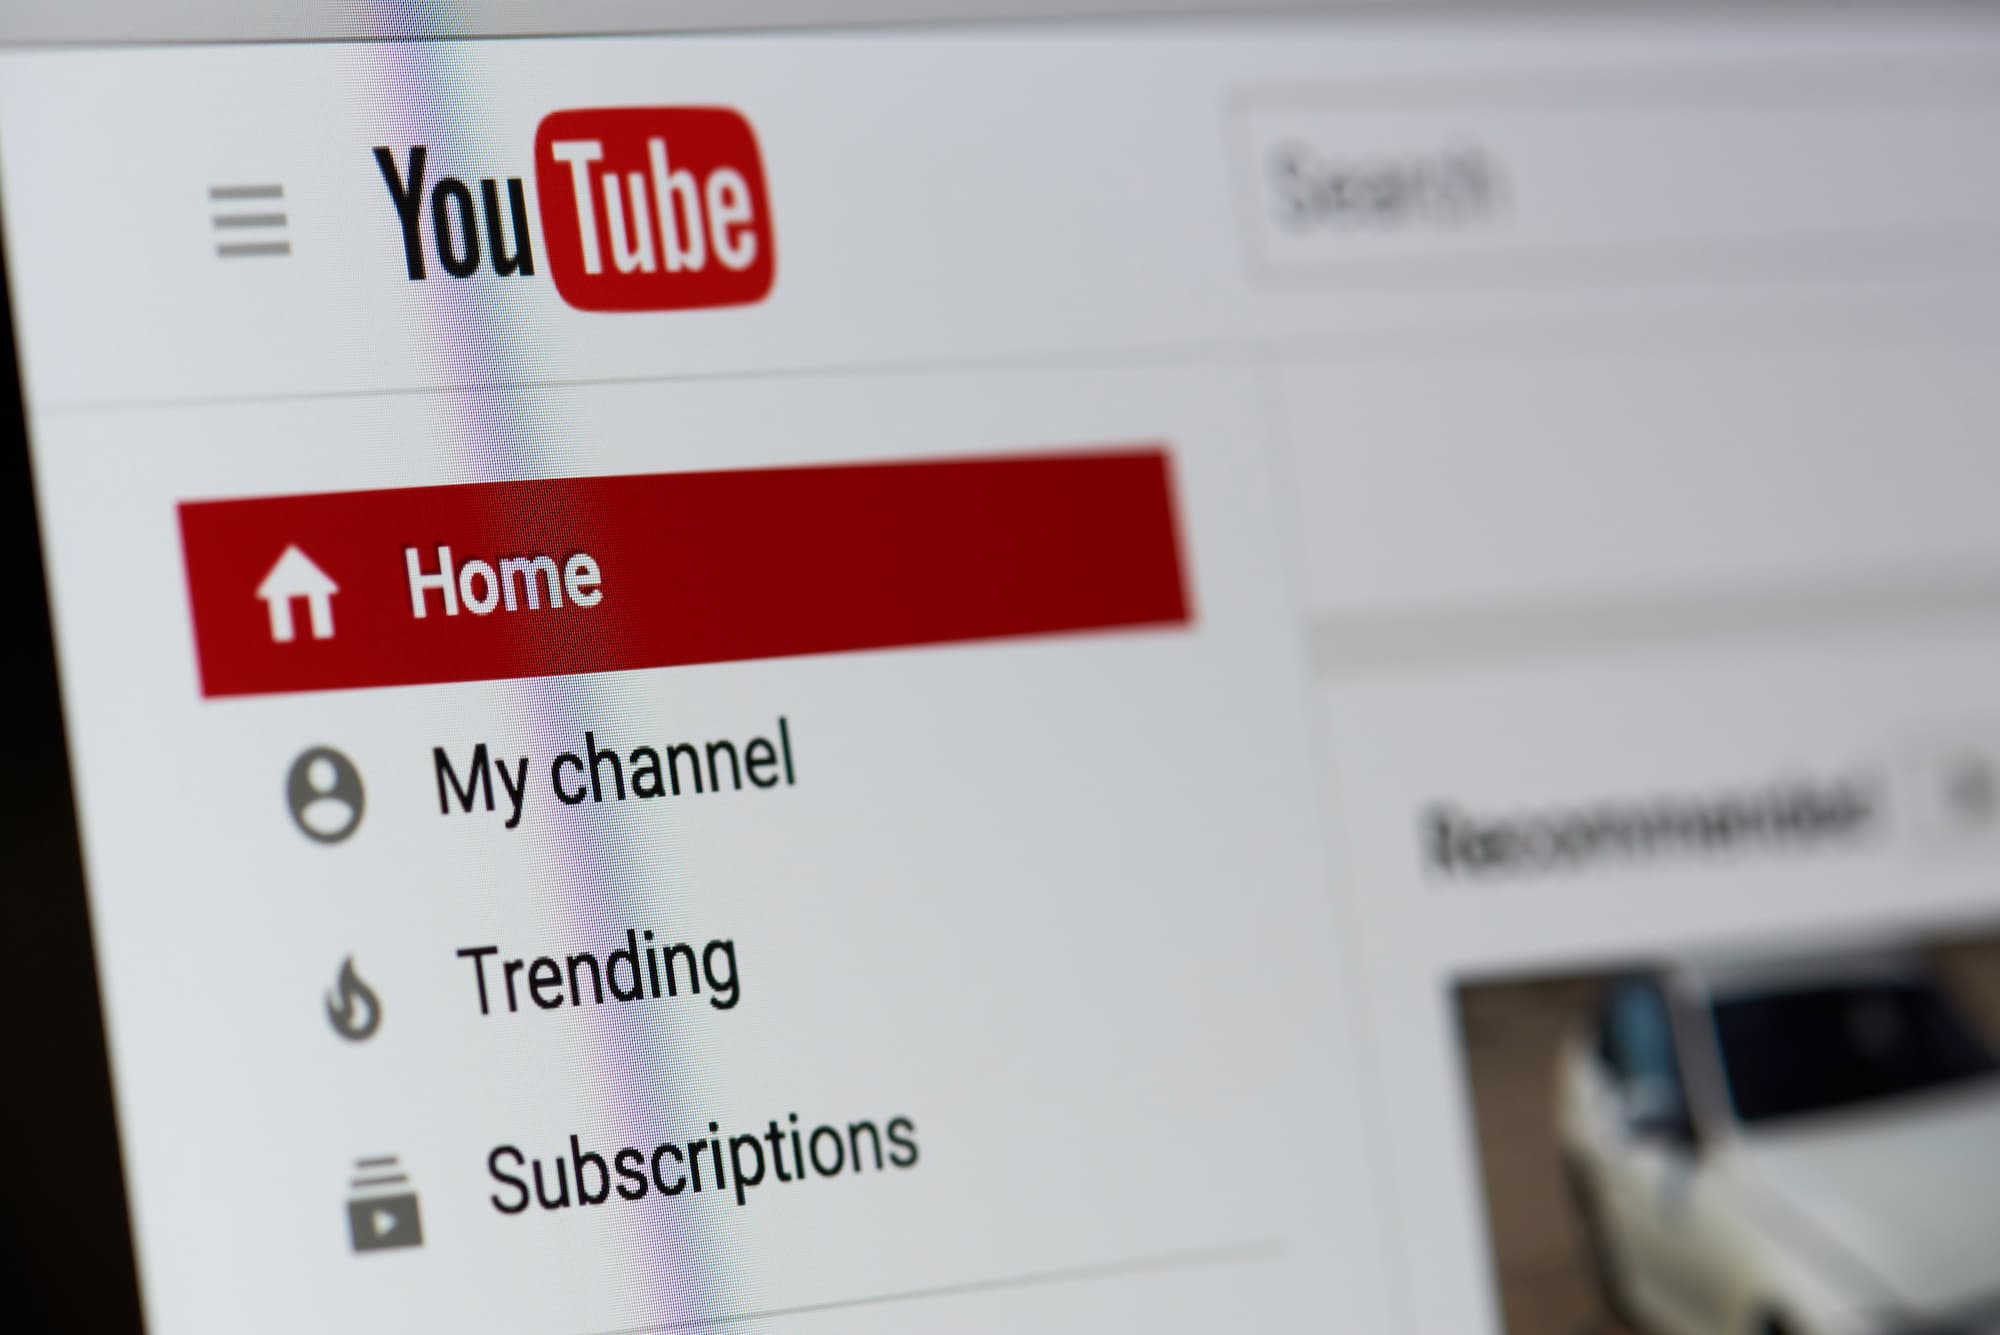 Key Tips to Growing Your YouTube Channel